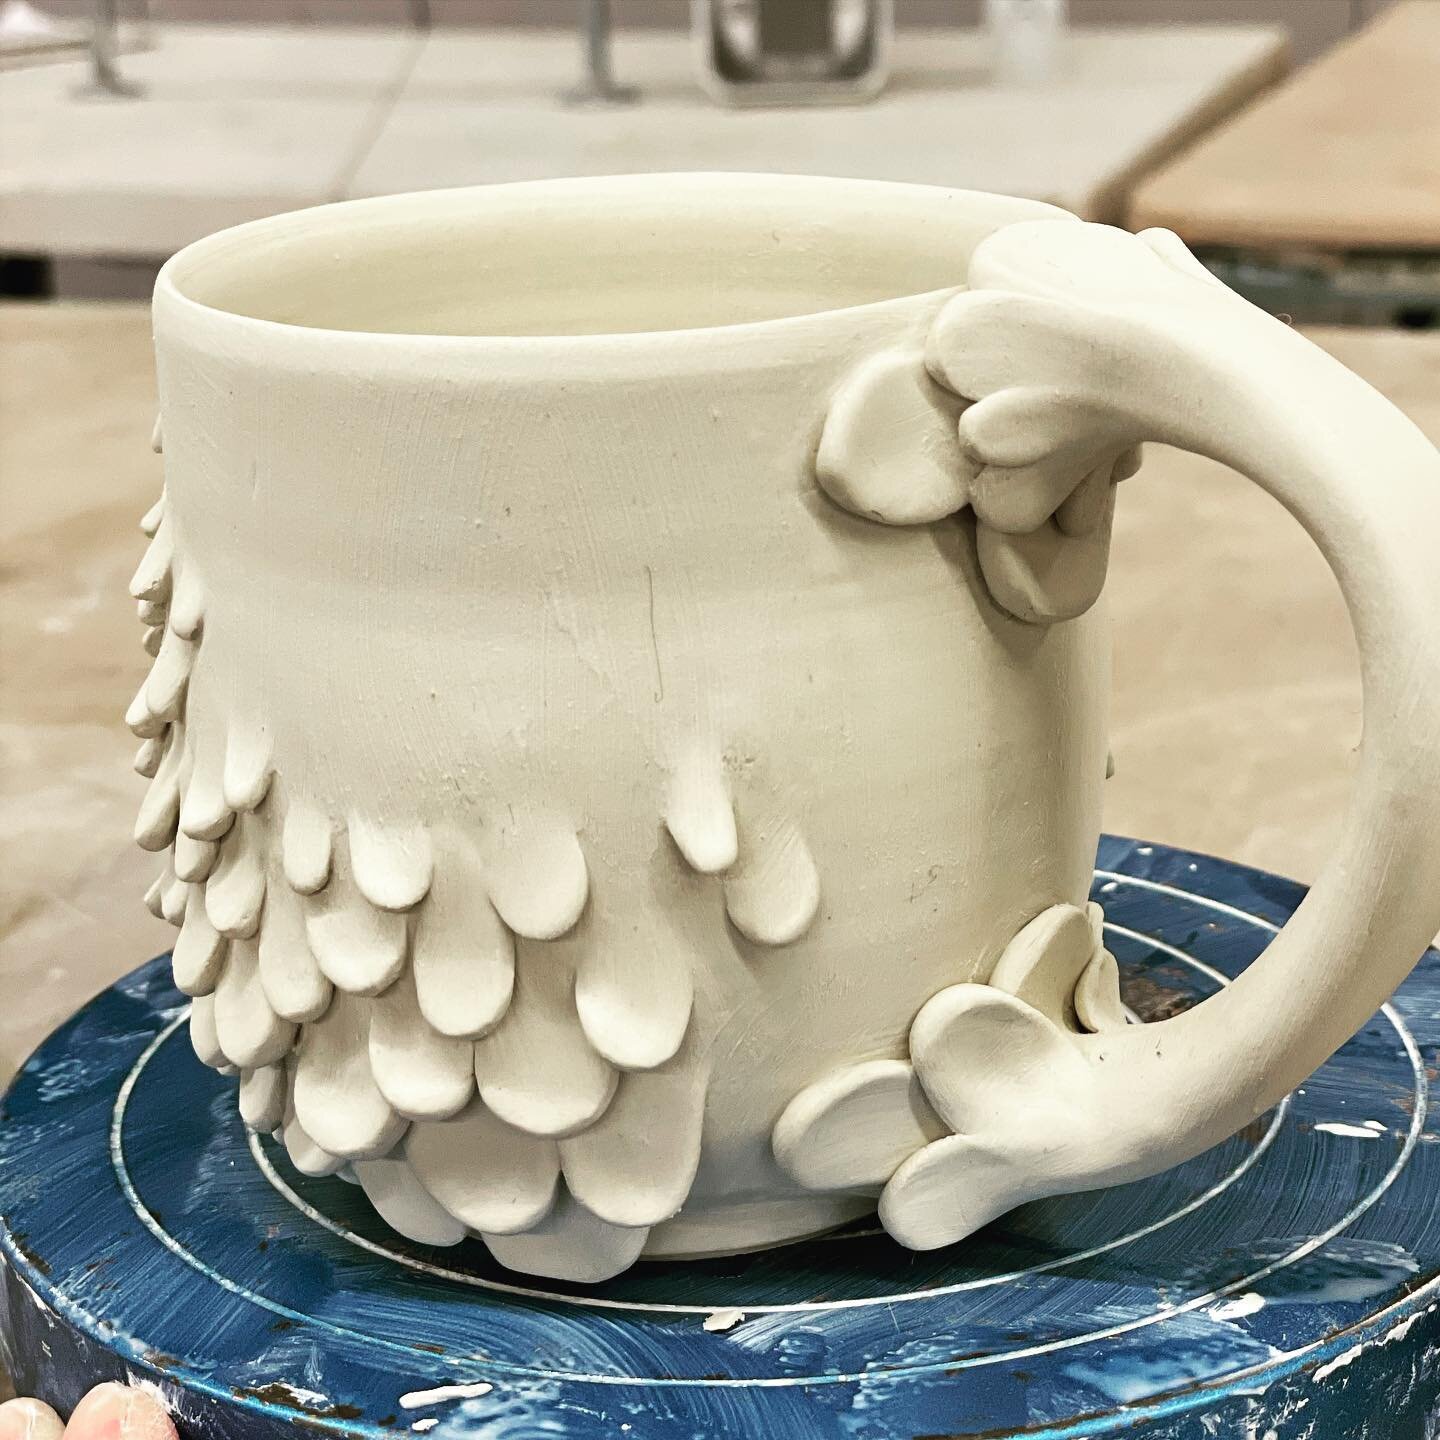 Having fun with some textured mugs...it&rsquo;s challenging and exciting to think about everyday objects as sculpture. I&rsquo;ve been thinking a lot about breathing some life into inanimate objects. #mug #texture #porcelain #handbuiltpottery #thrown